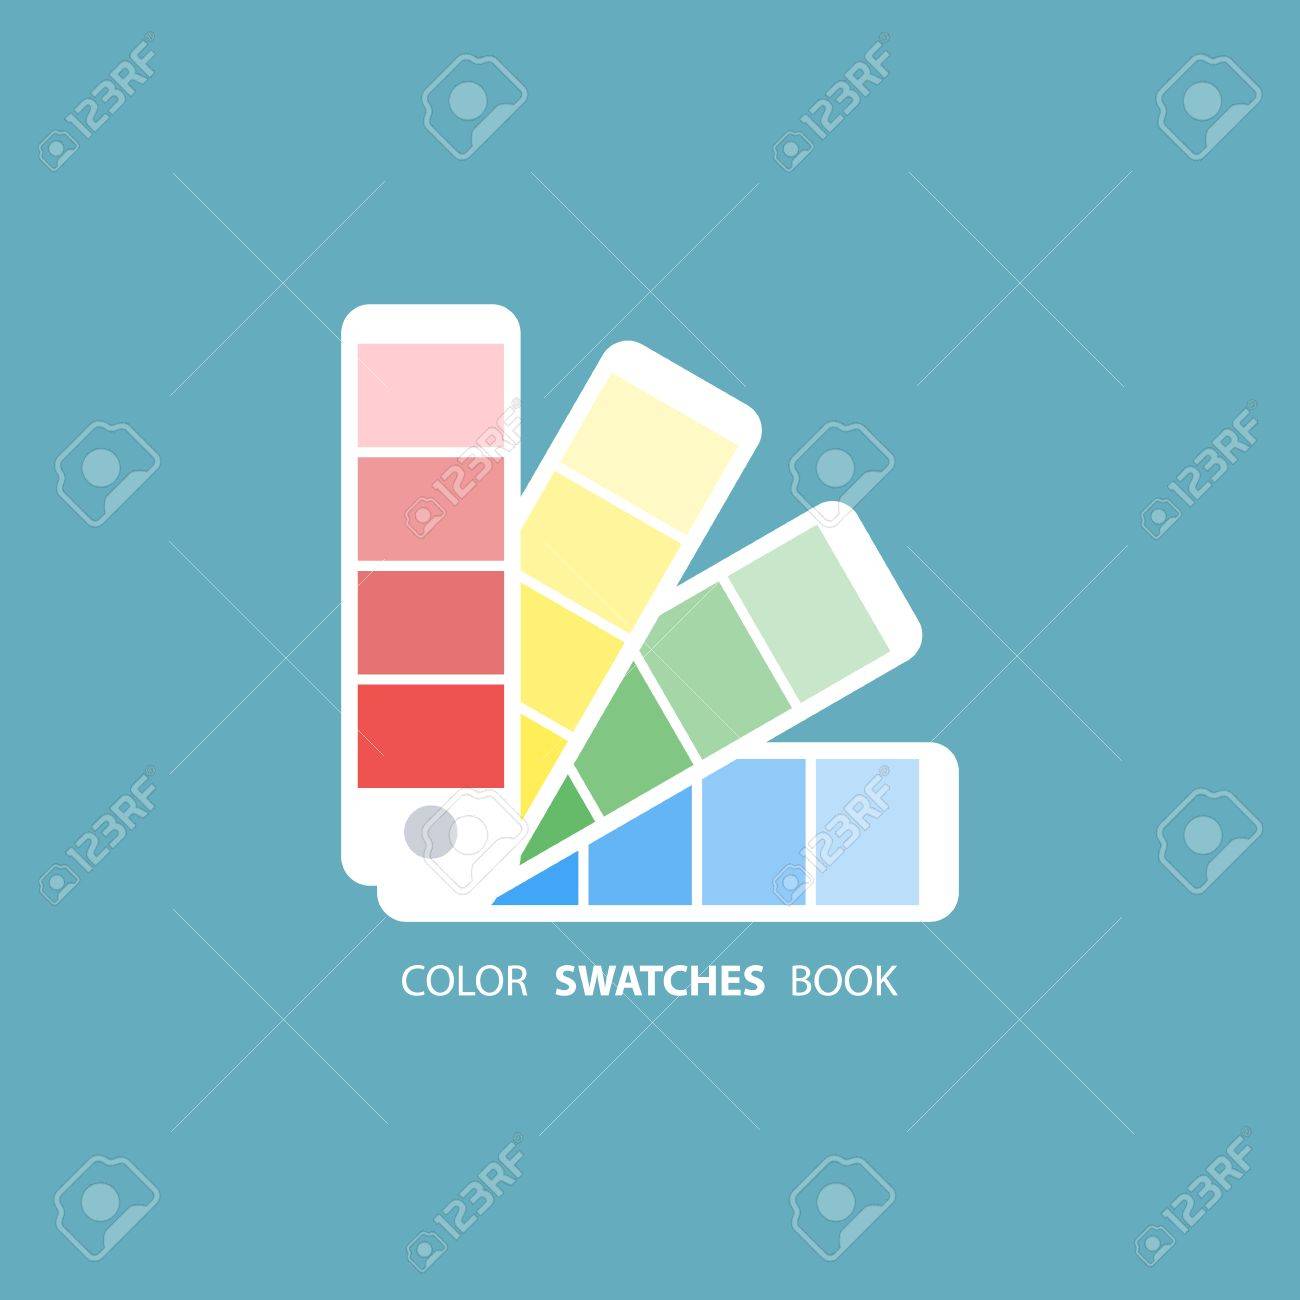 Color Swatches Book. Color Palette Guide. Color Swatch Icon 